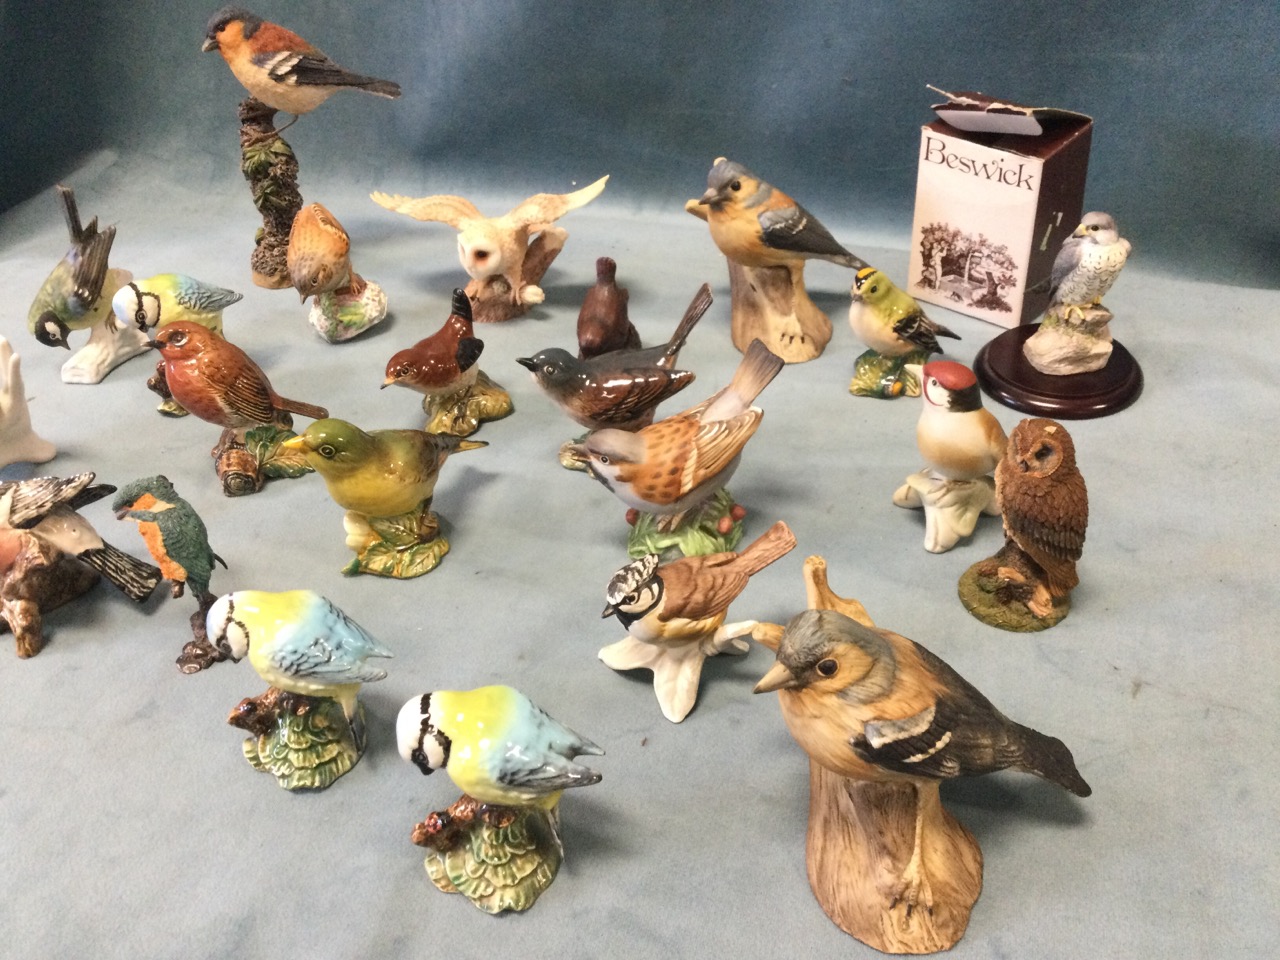 A collection of ceramic birds - Beswick, Wedgwood, resin, European porcelain, Royal Doulton, Goebel, - Image 3 of 3